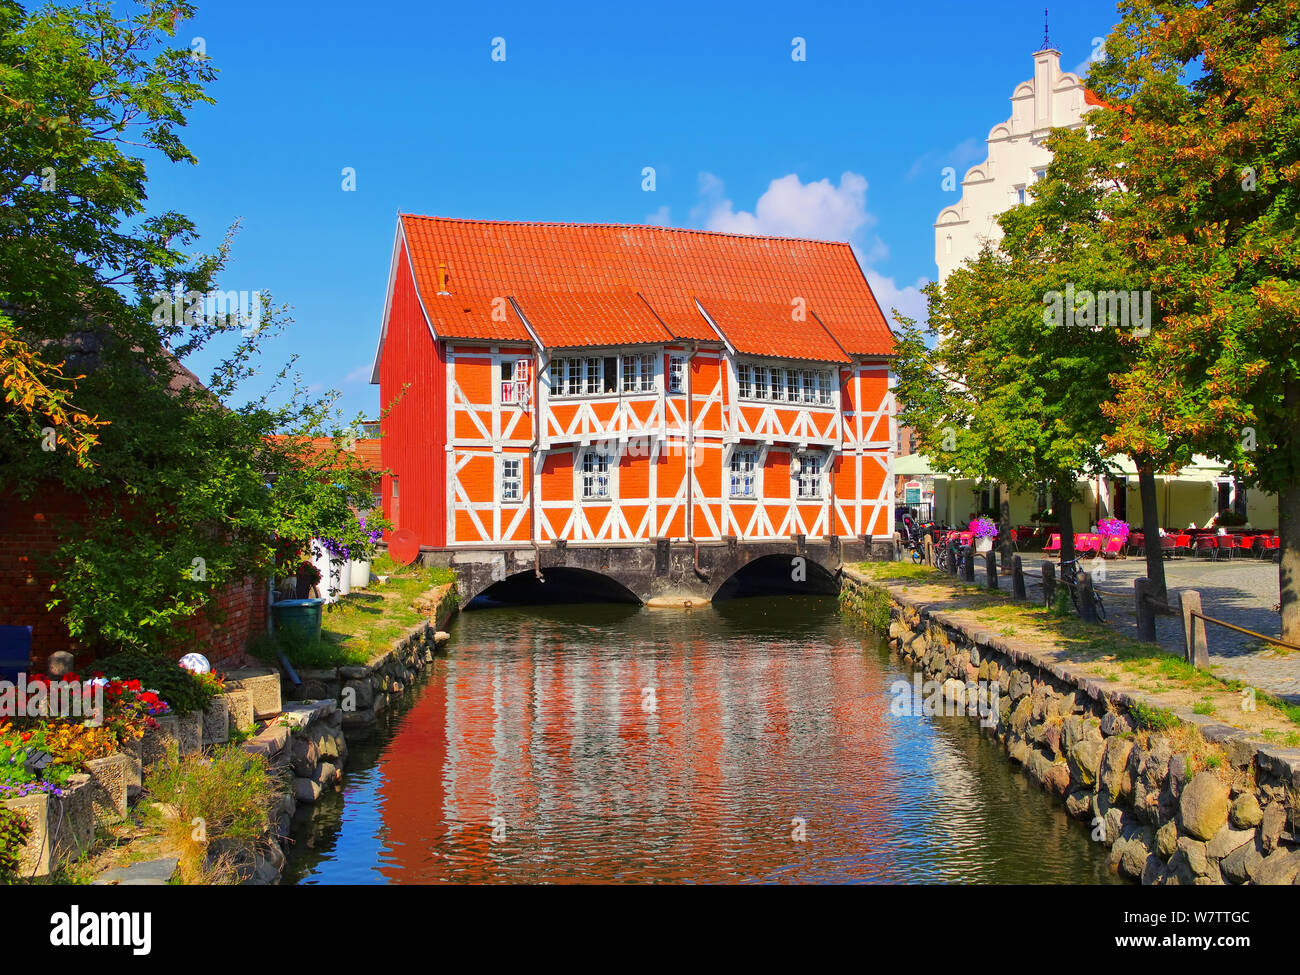 the old town Wismar in northern Germany, the red house Stock Photo